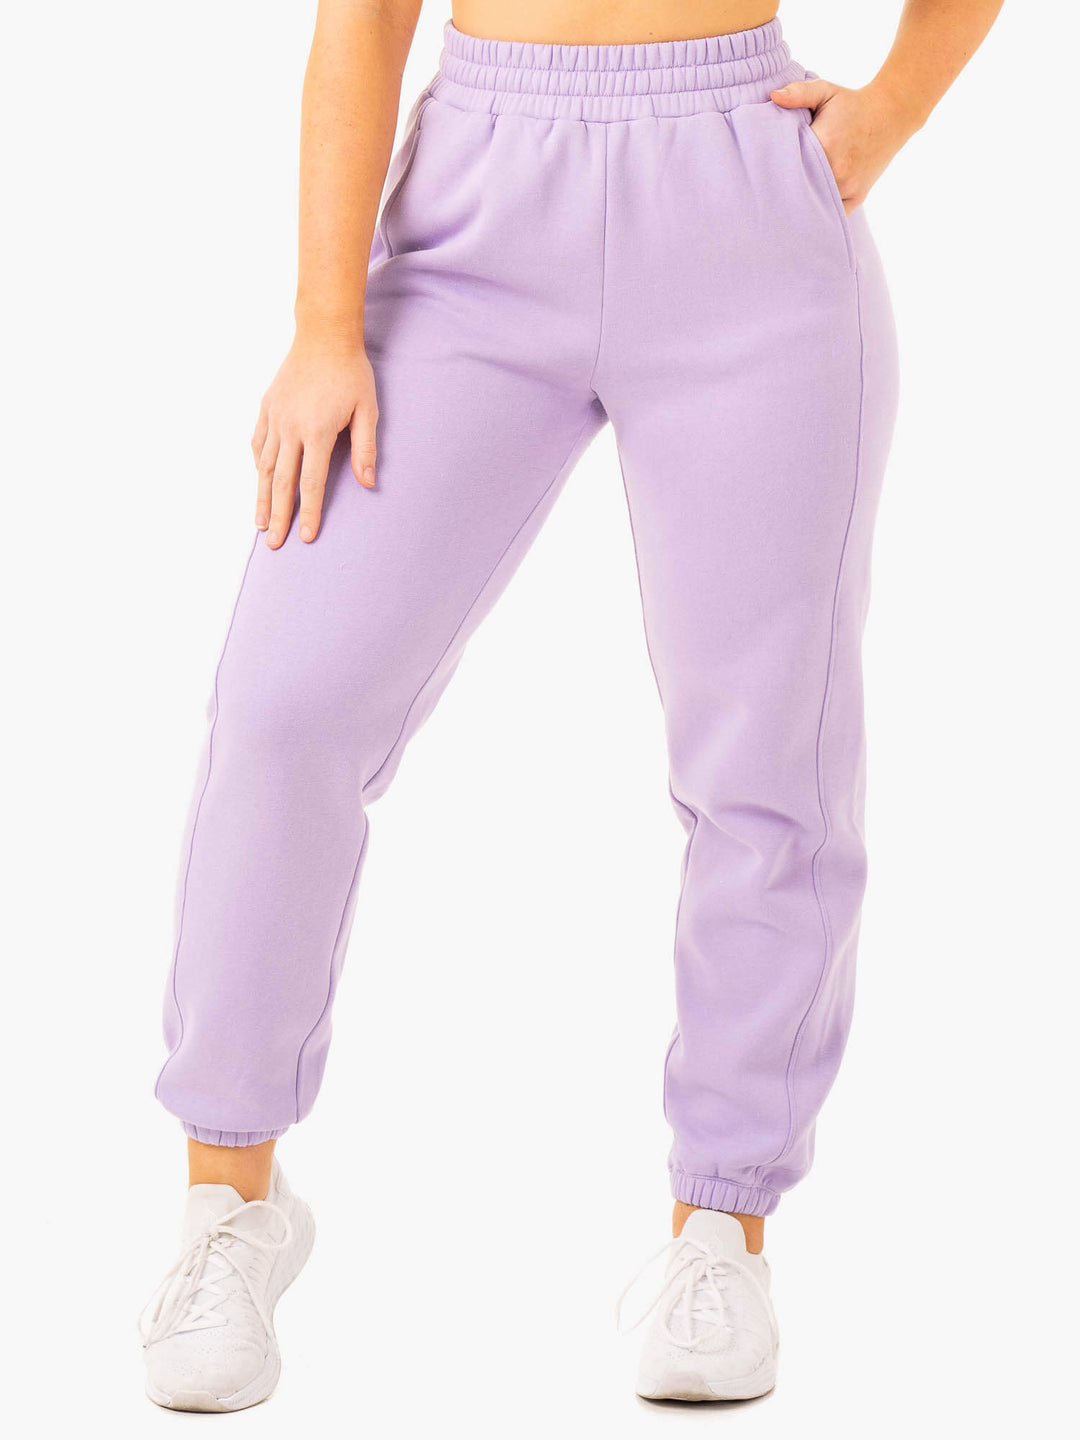 Sideline Track Pants - Lilac Clothing Ryderwear 